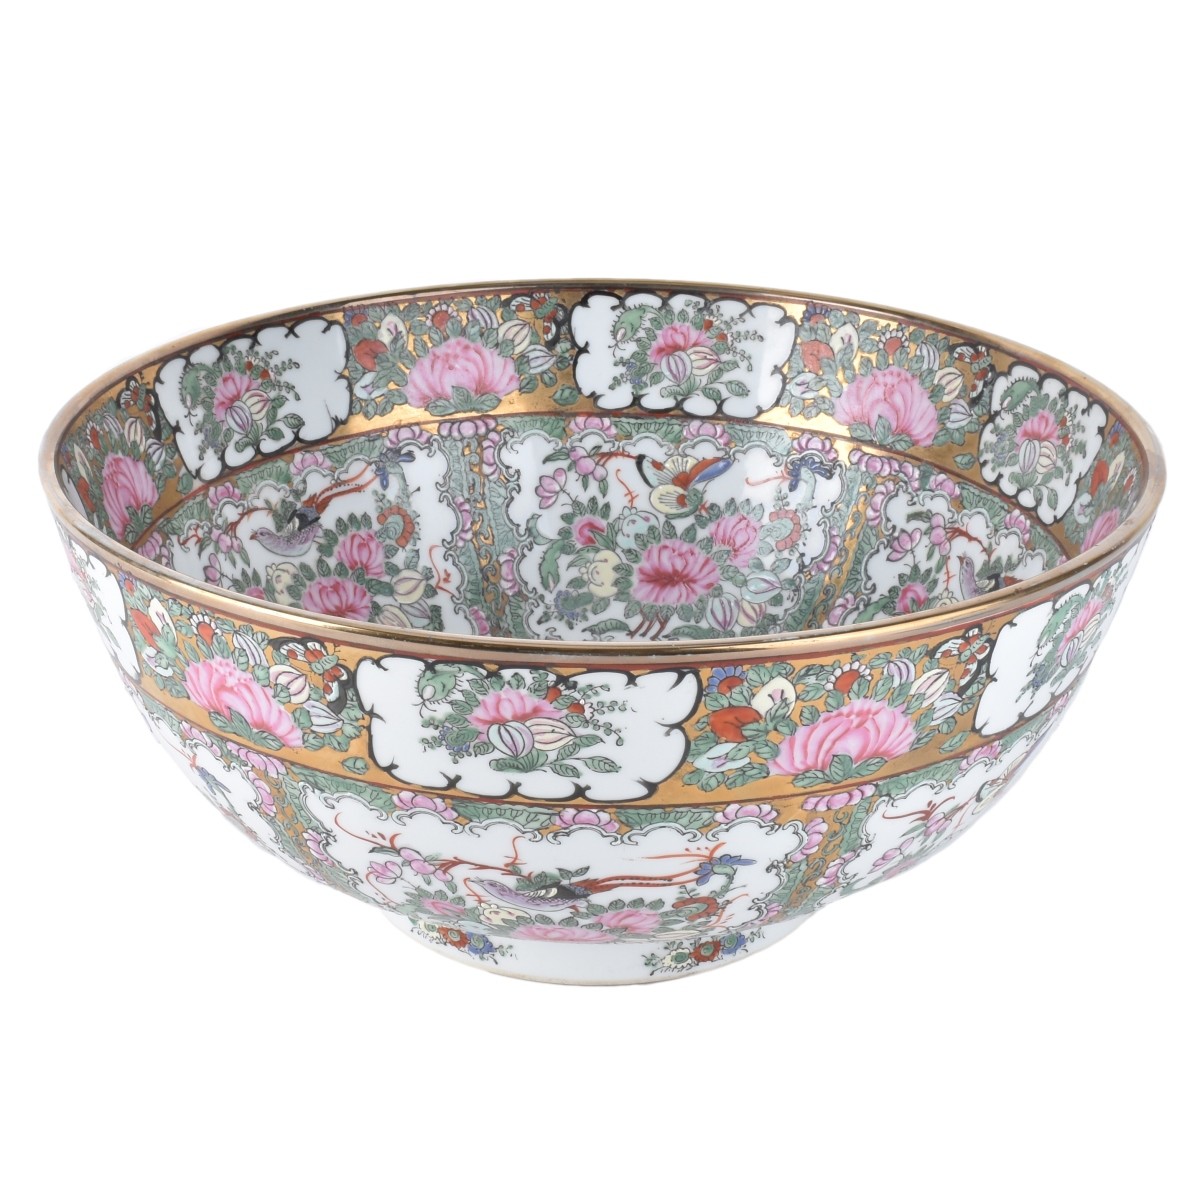 Chinese Punch Bowl